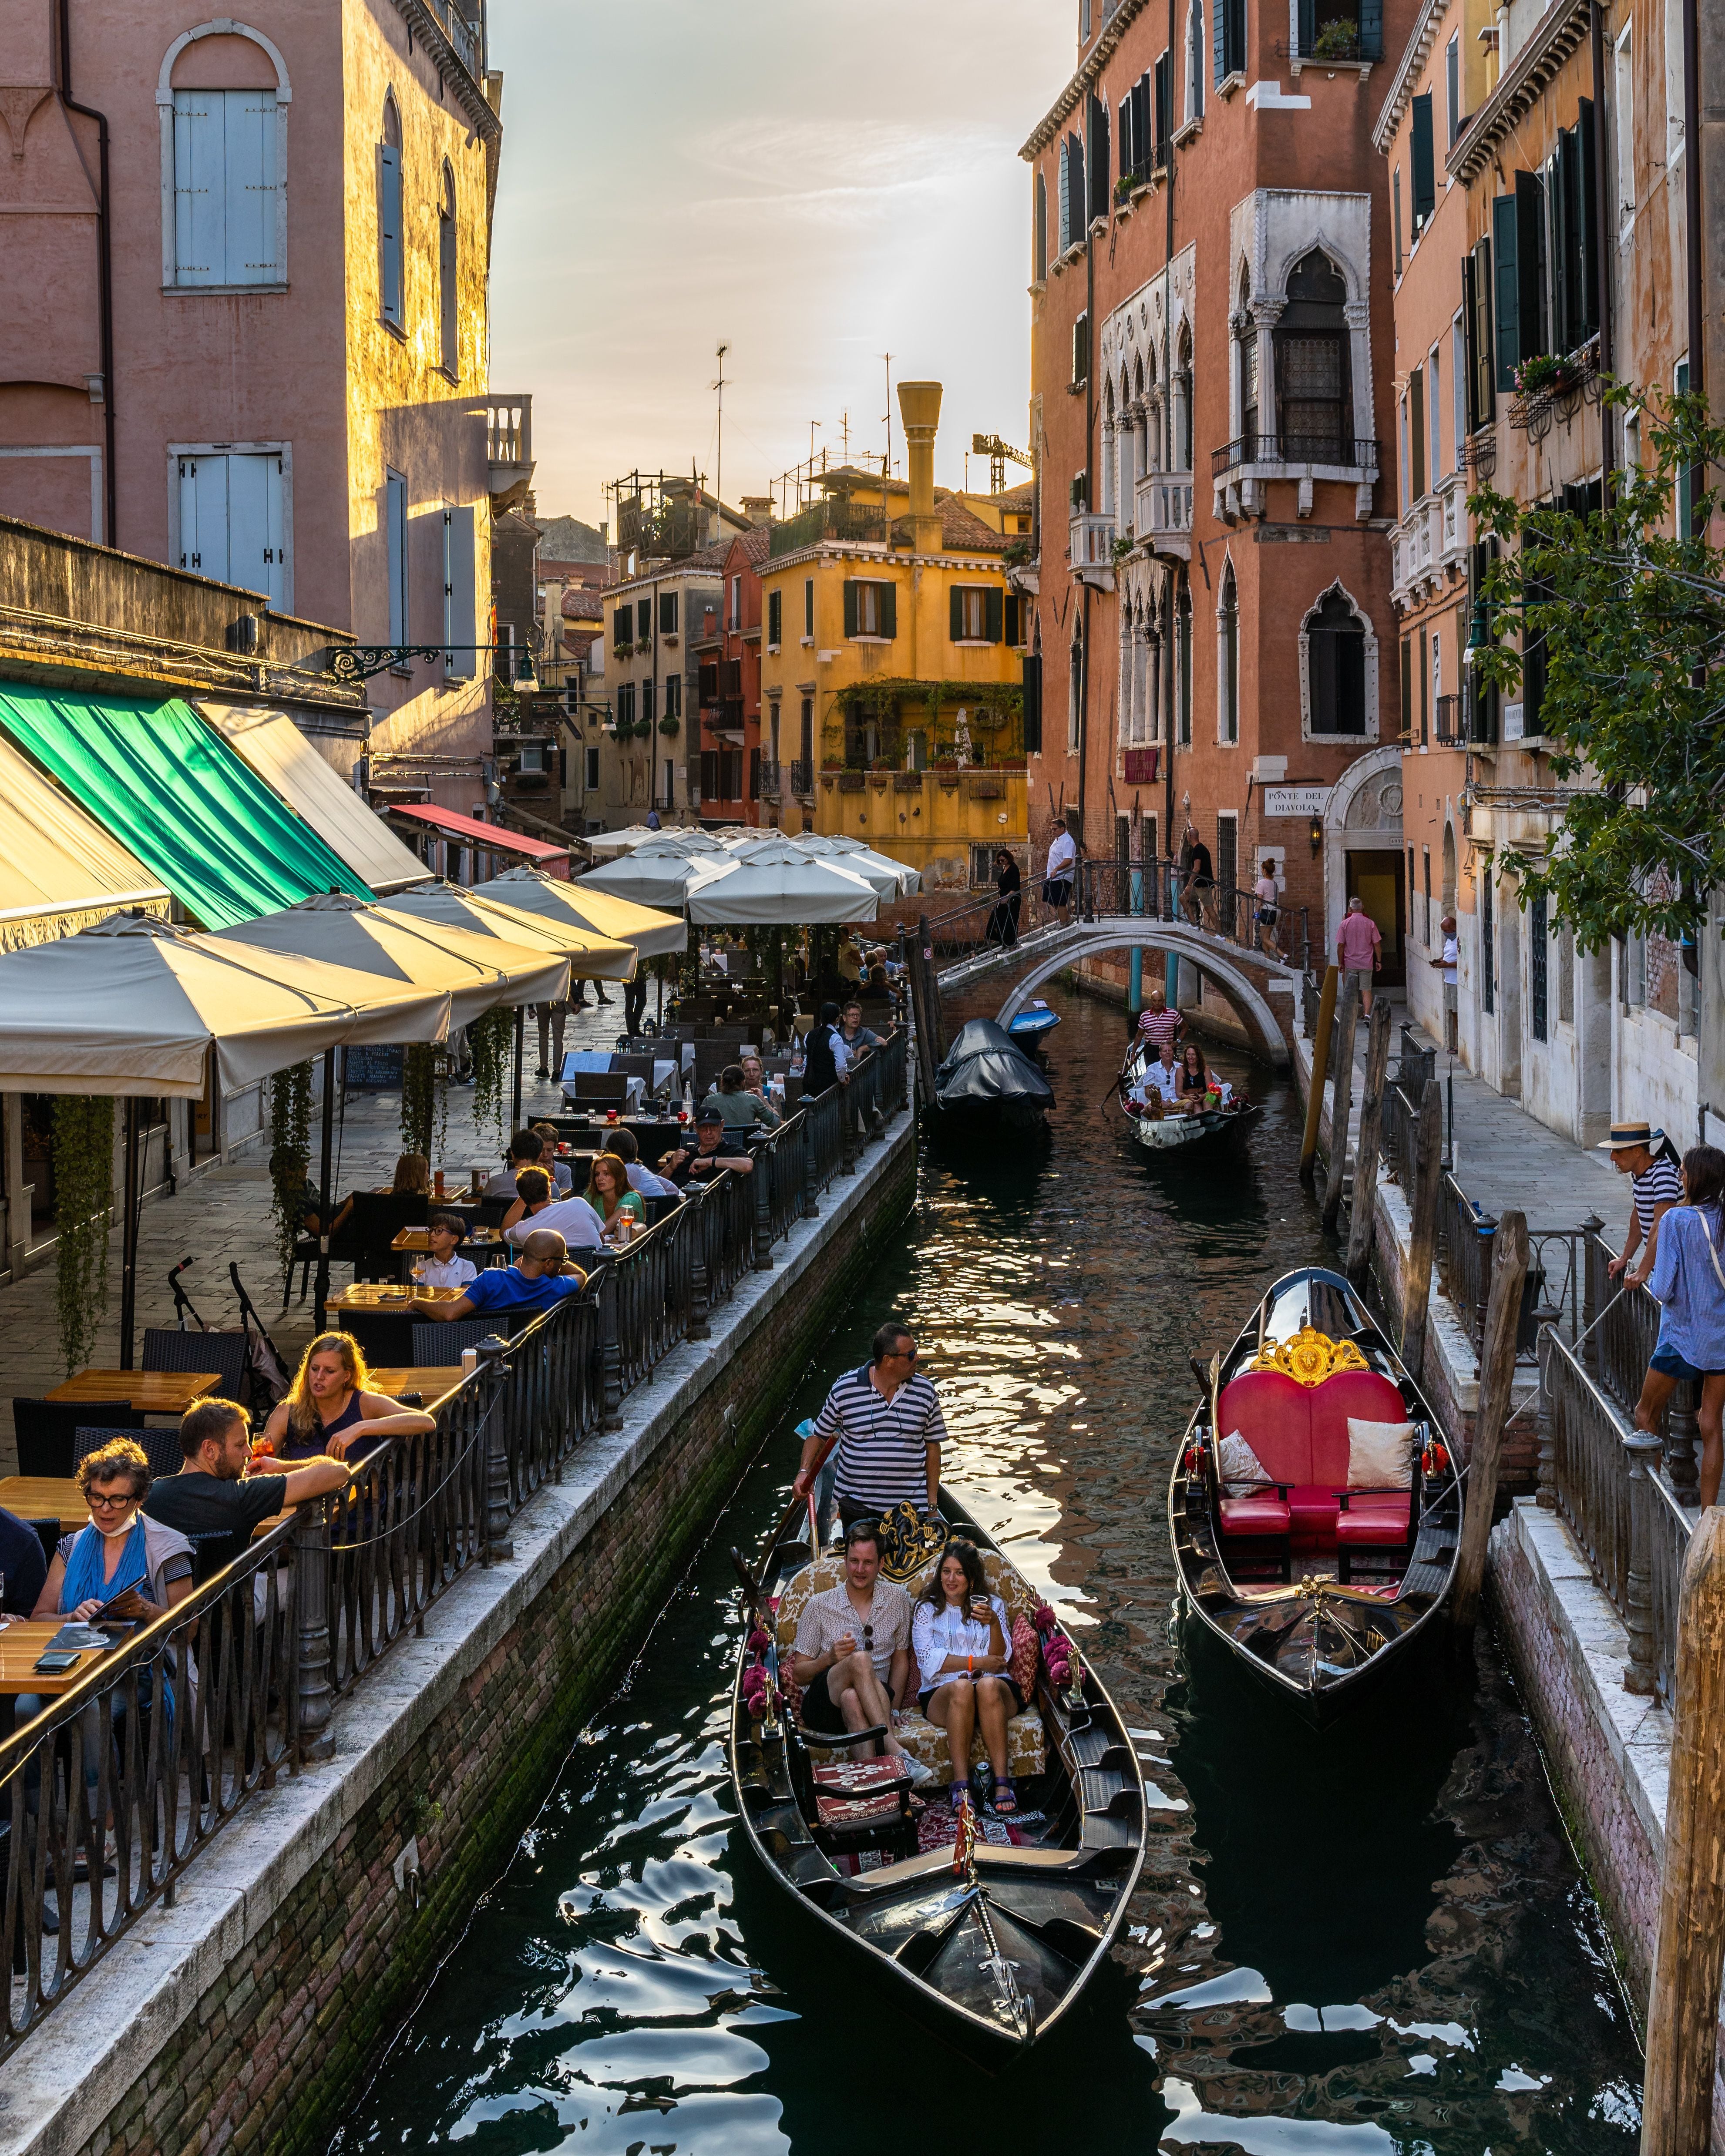 Venice, Italy, Sept. 11, 2020 – Picturesque Venice canal with gondolas and tourists on the right enjoying the sunset in a cocktail bar